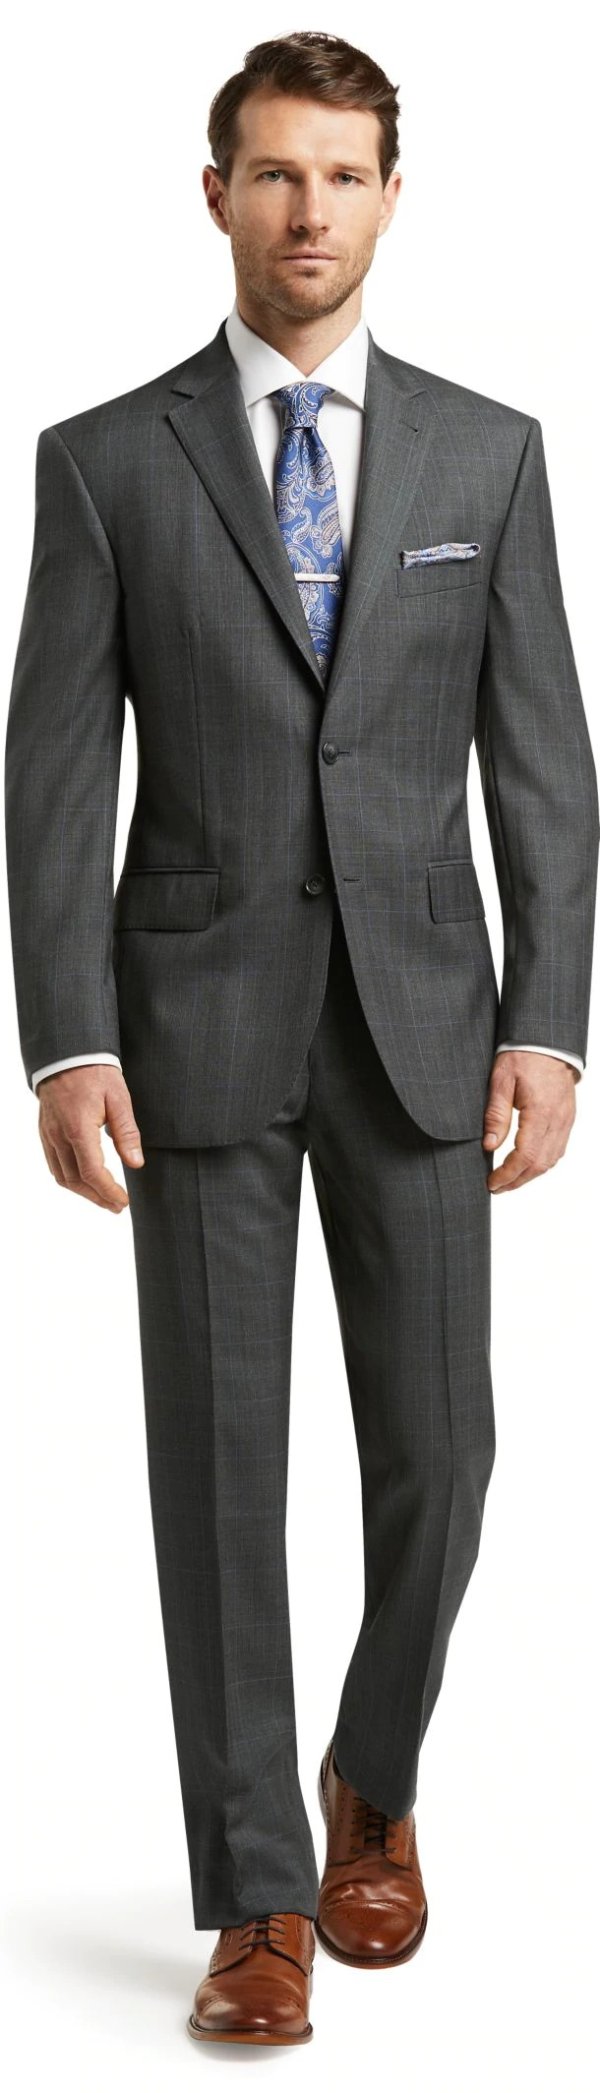 Reserve Collection Tailored Fit Plaid Suit CLEARANCE - All Clearance | Jos A Bank